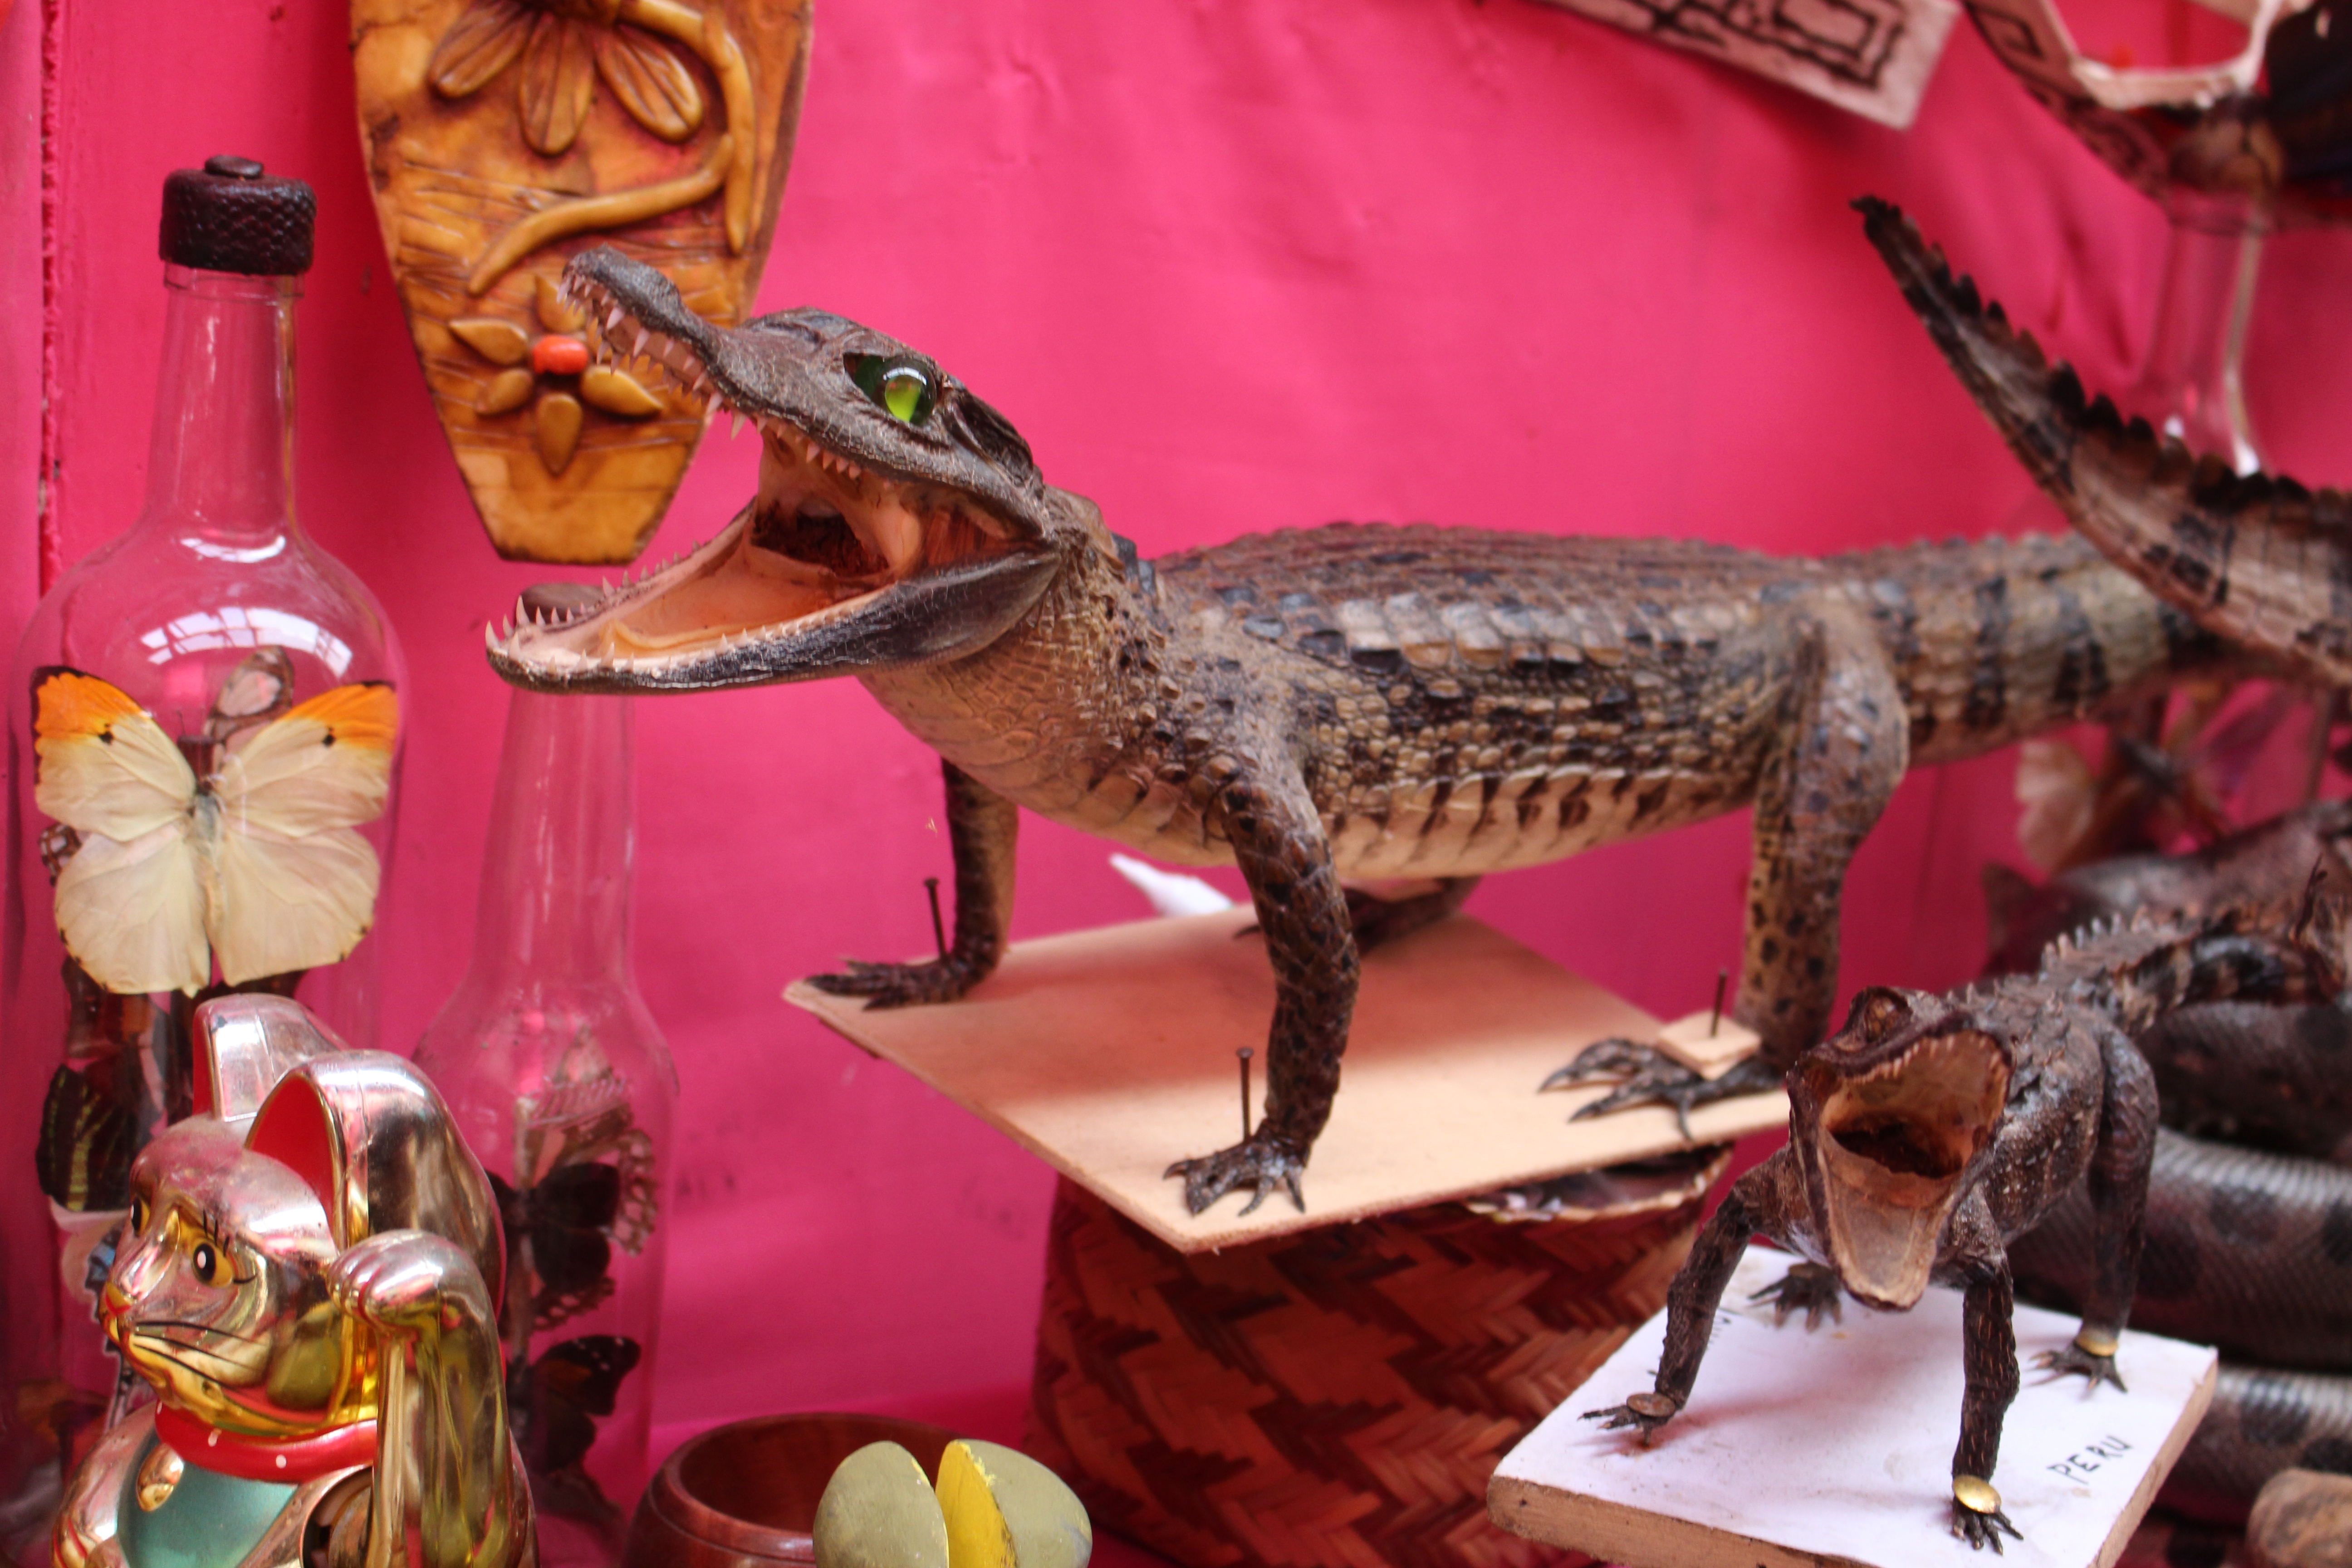 two stuffed alligators on stands and a butterfly in a jar representing the wildlife market